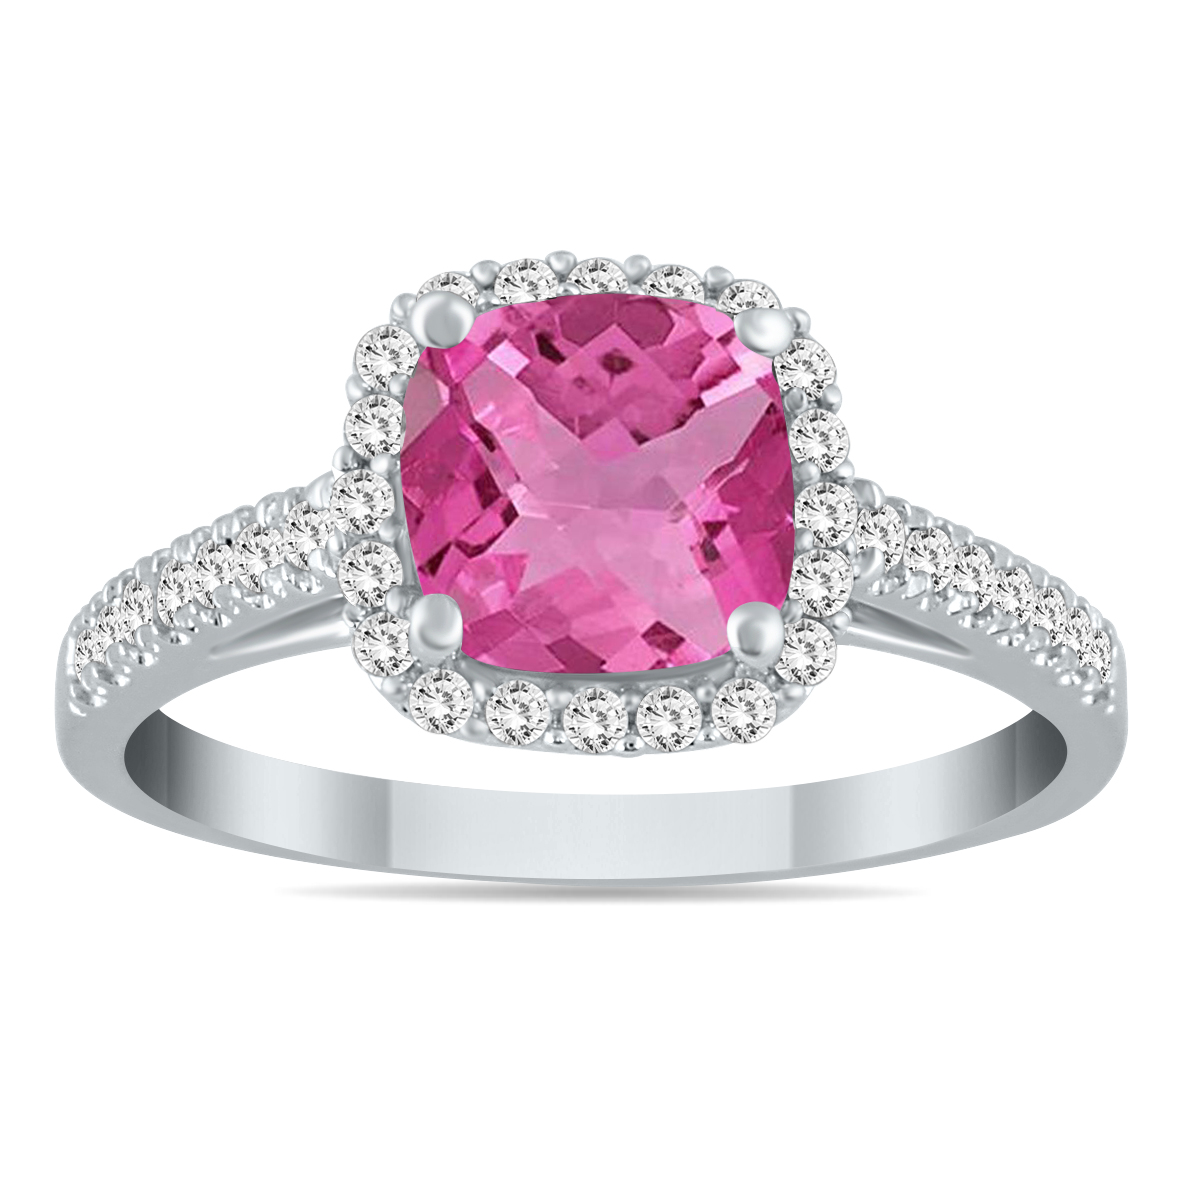 5MM Cushion Cut Pink Topaz and Diamond Halo Ring in 10K White Gold